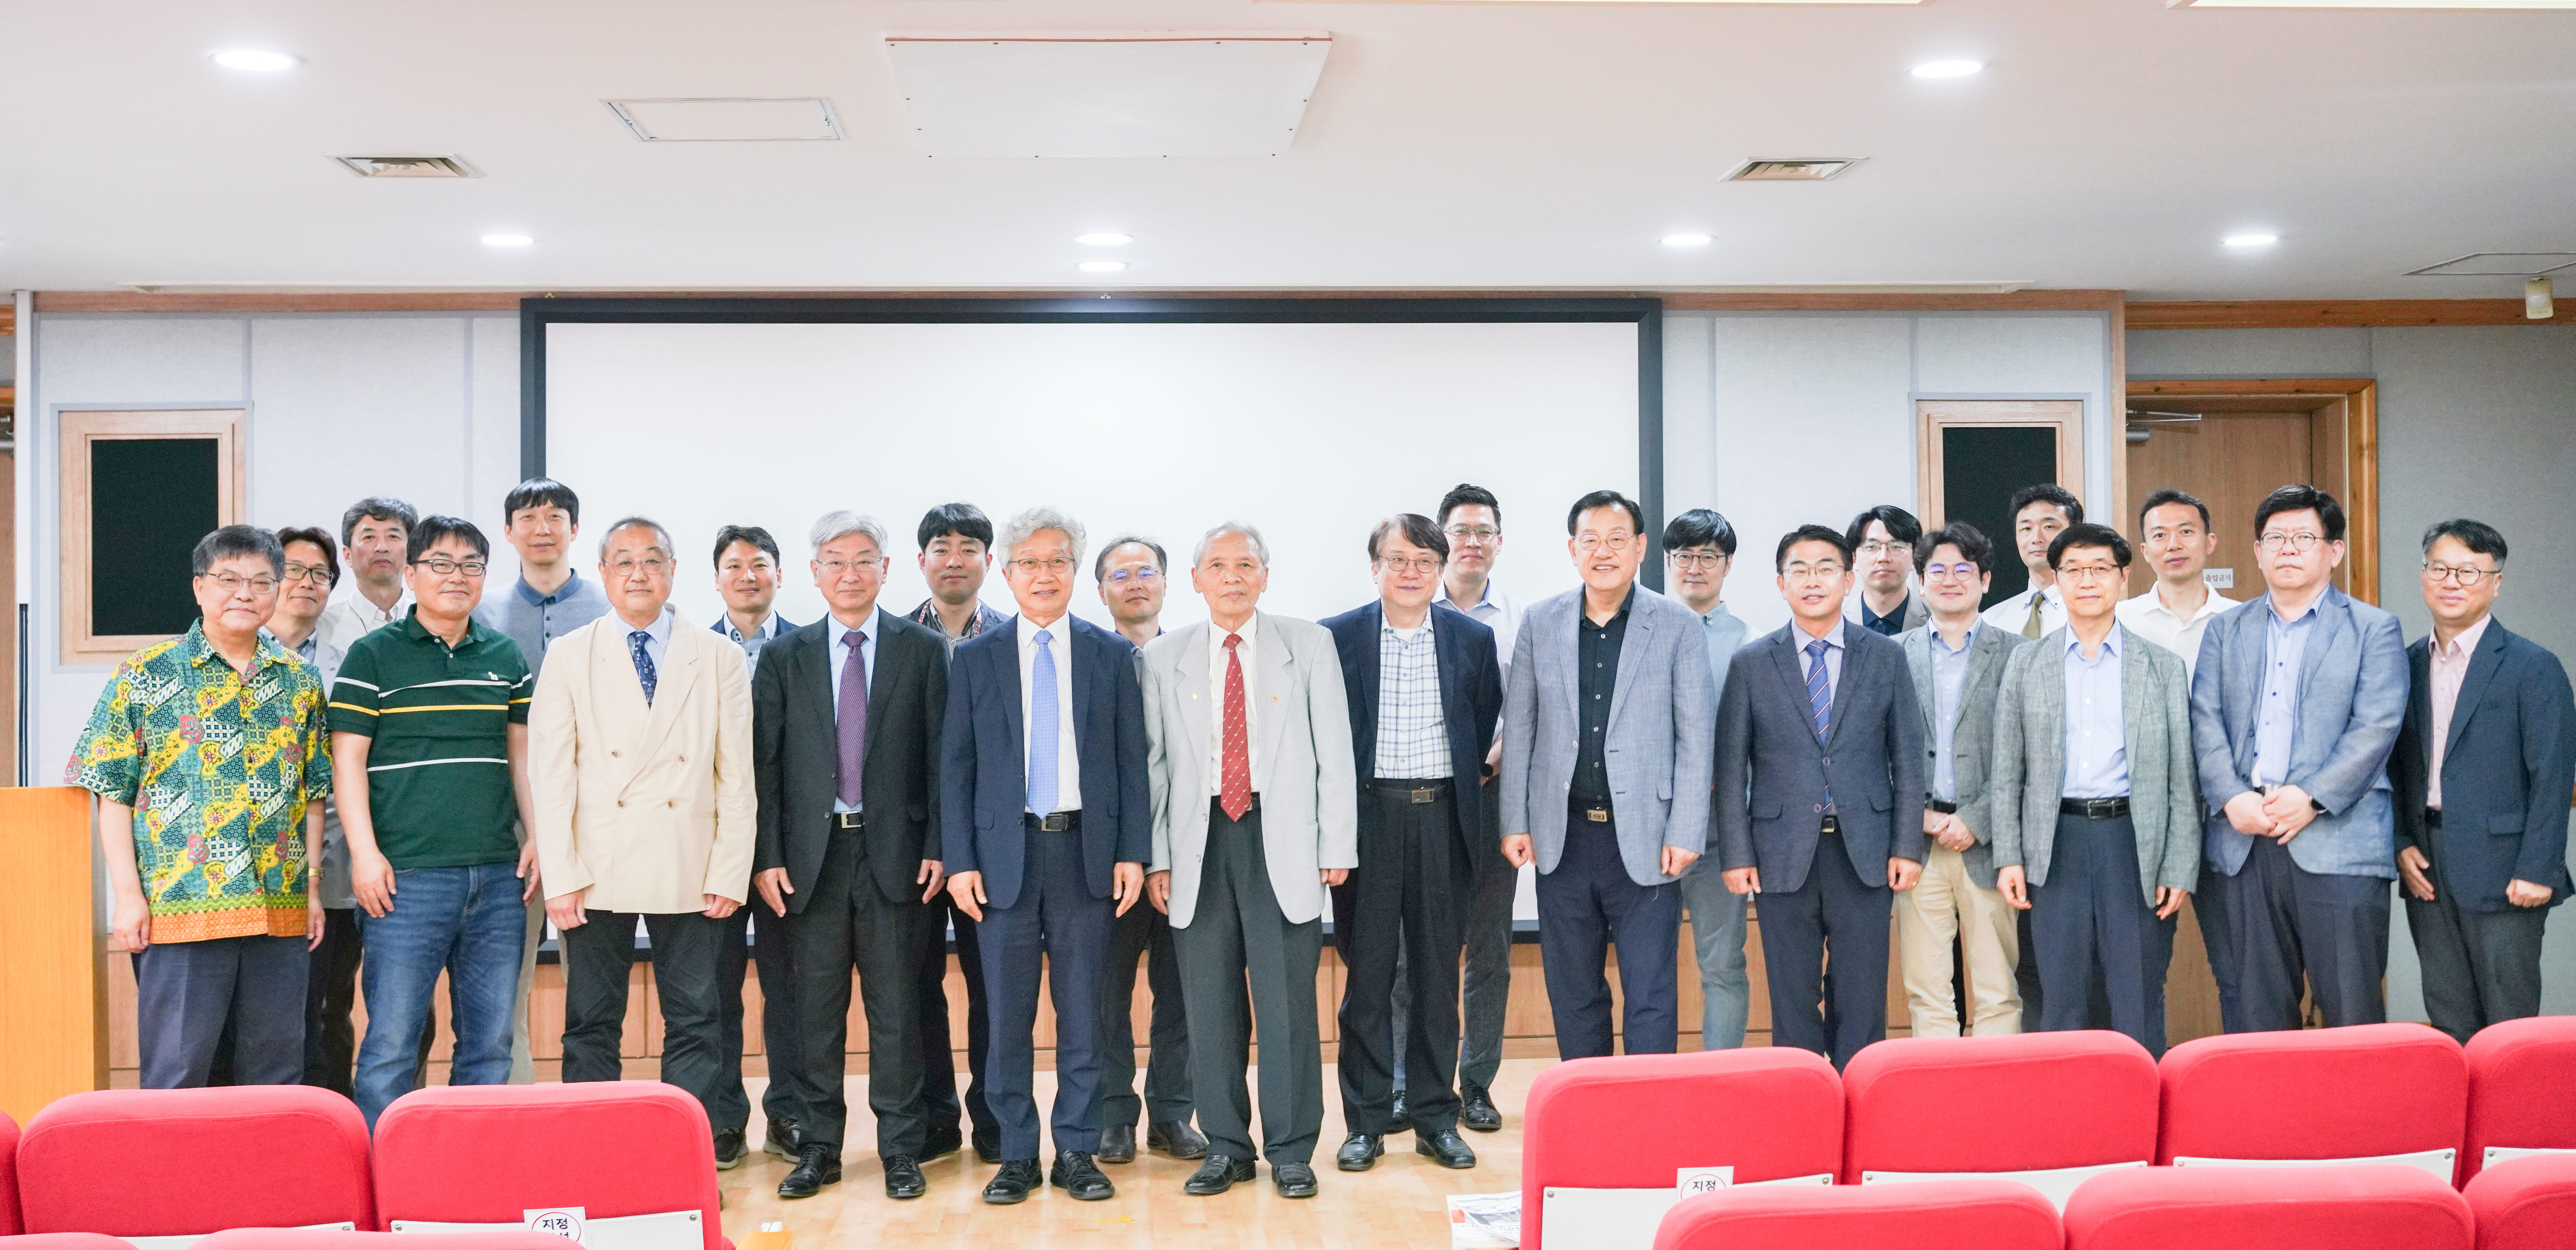 The 30th Anniversary of the Founding of the Department of Polymer-Nano Science & Technology and the Celebration Symposium for Professor Myong-Hoon Lee's retirement 첨부 이미지